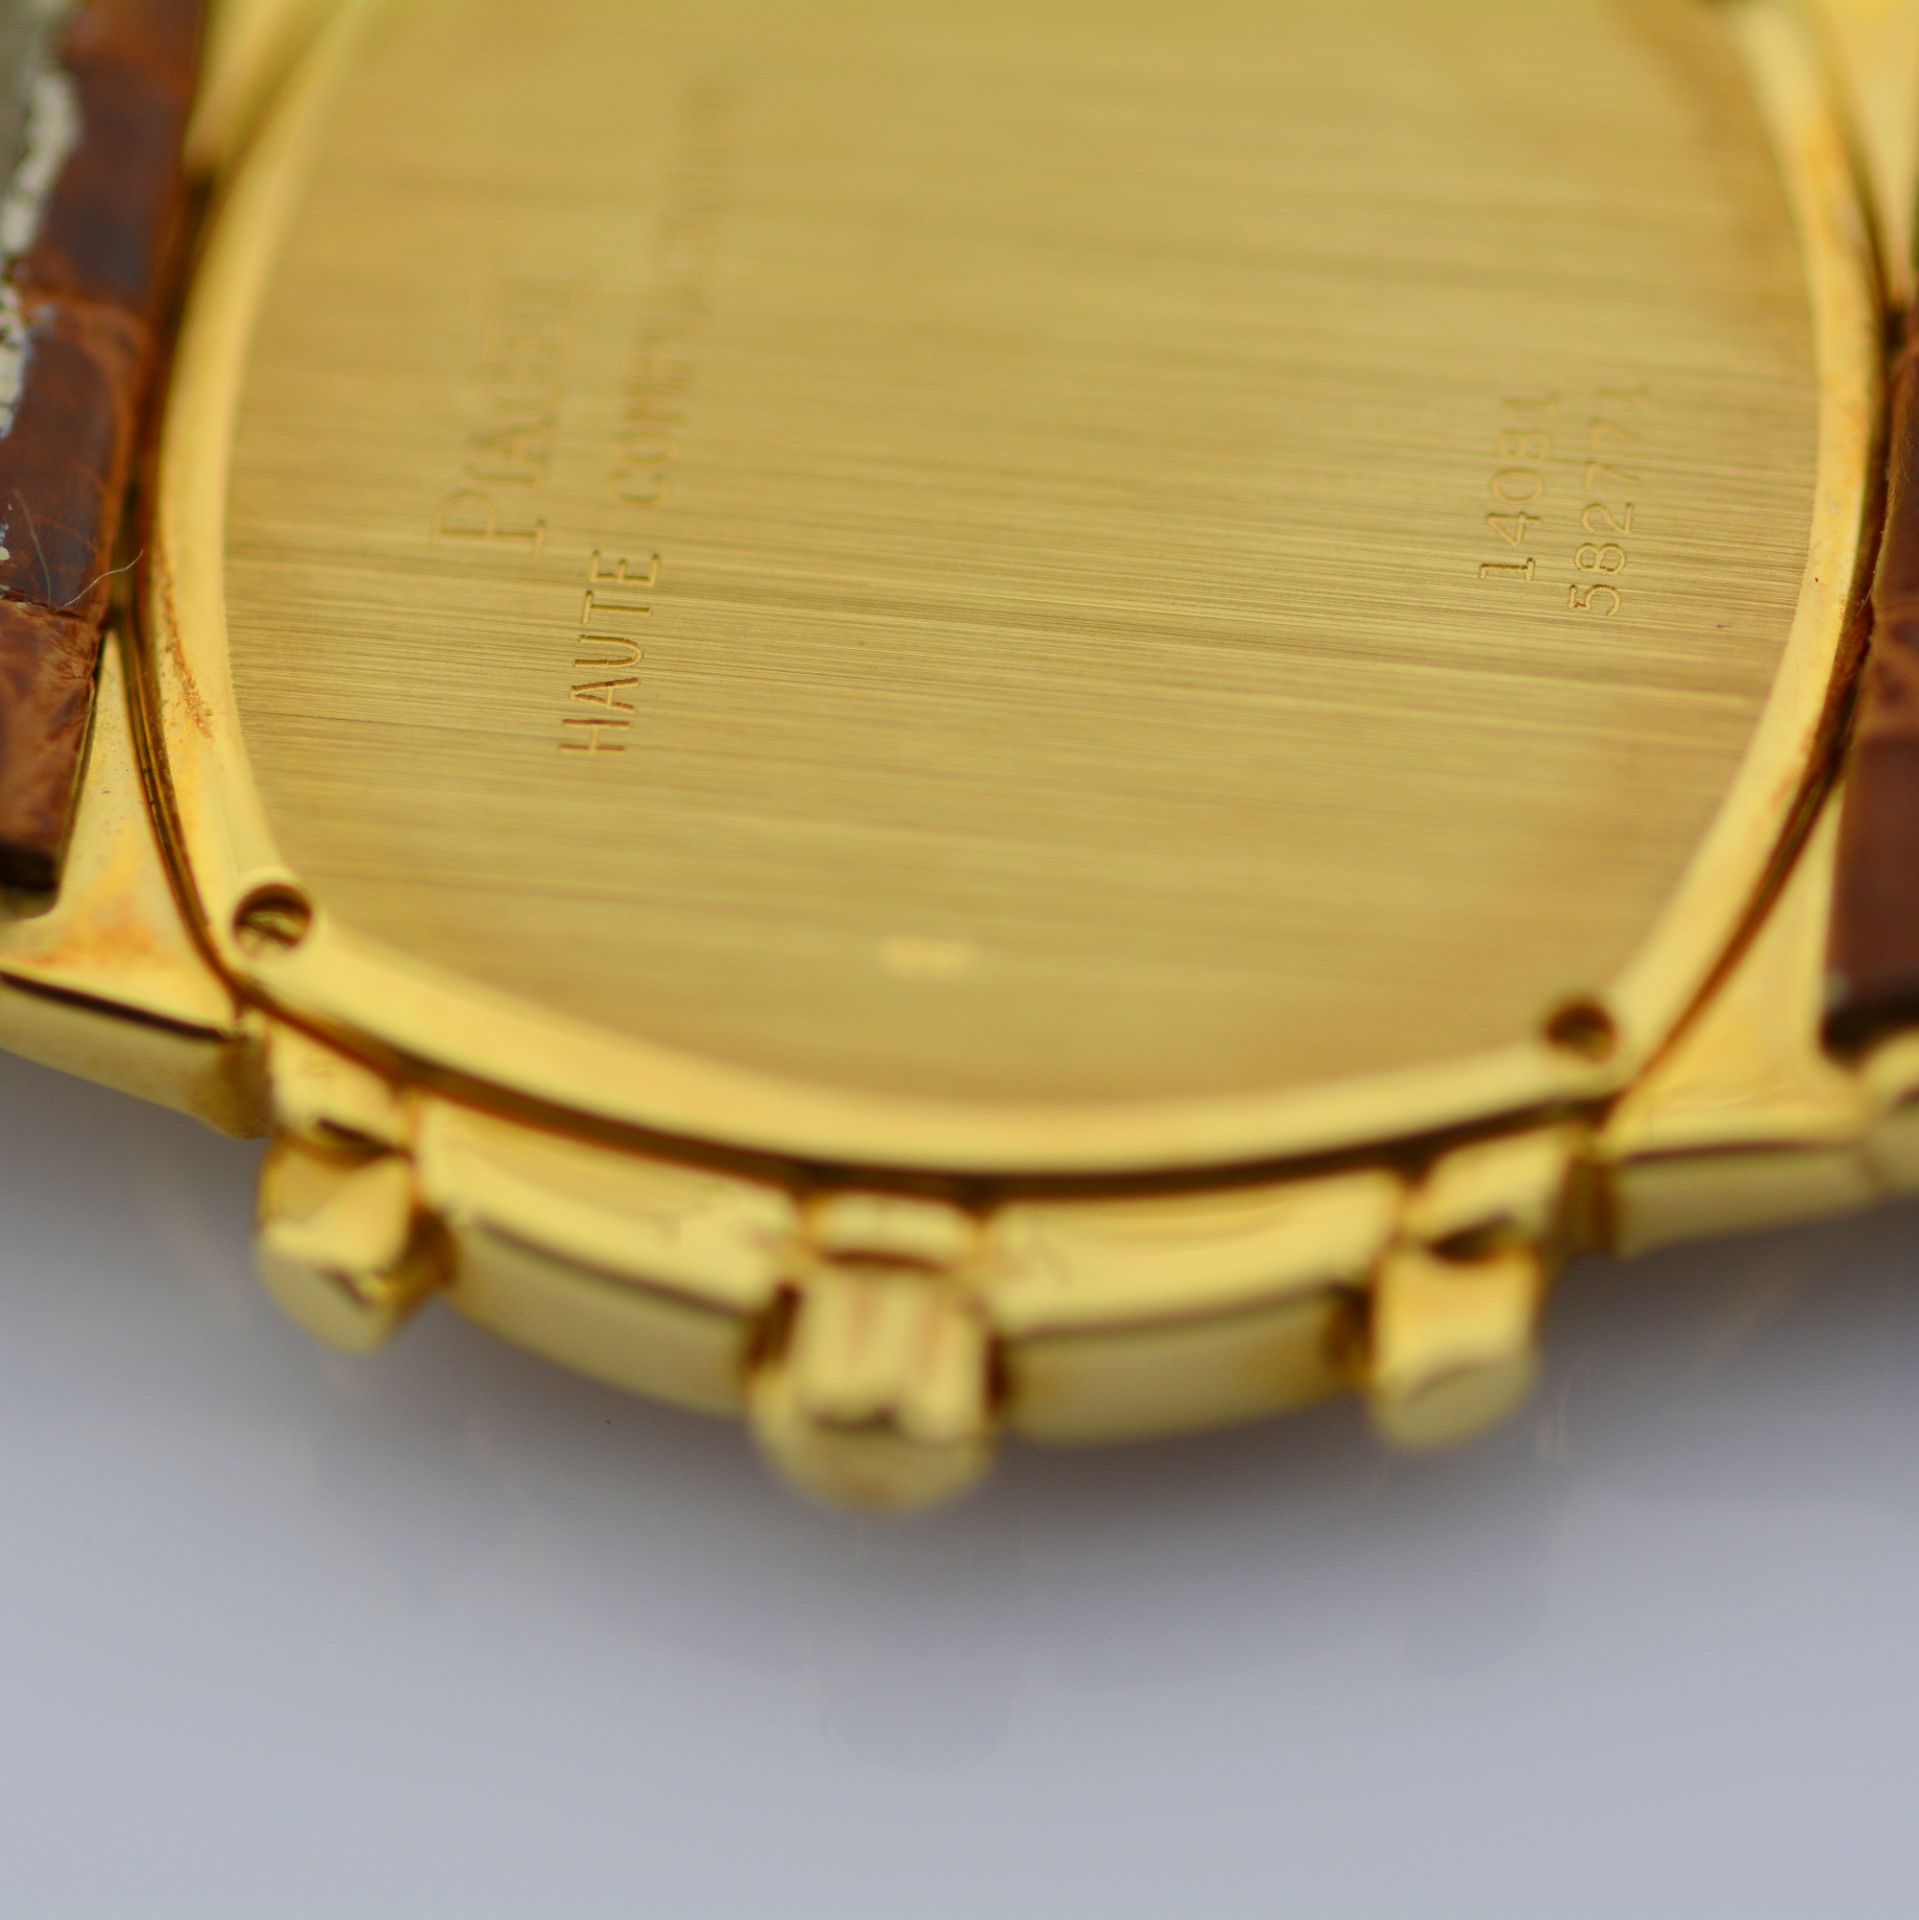 Piaget / Tanagra Chronograph - Lady's Yellow gold Wrist Watch - Image 4 of 15